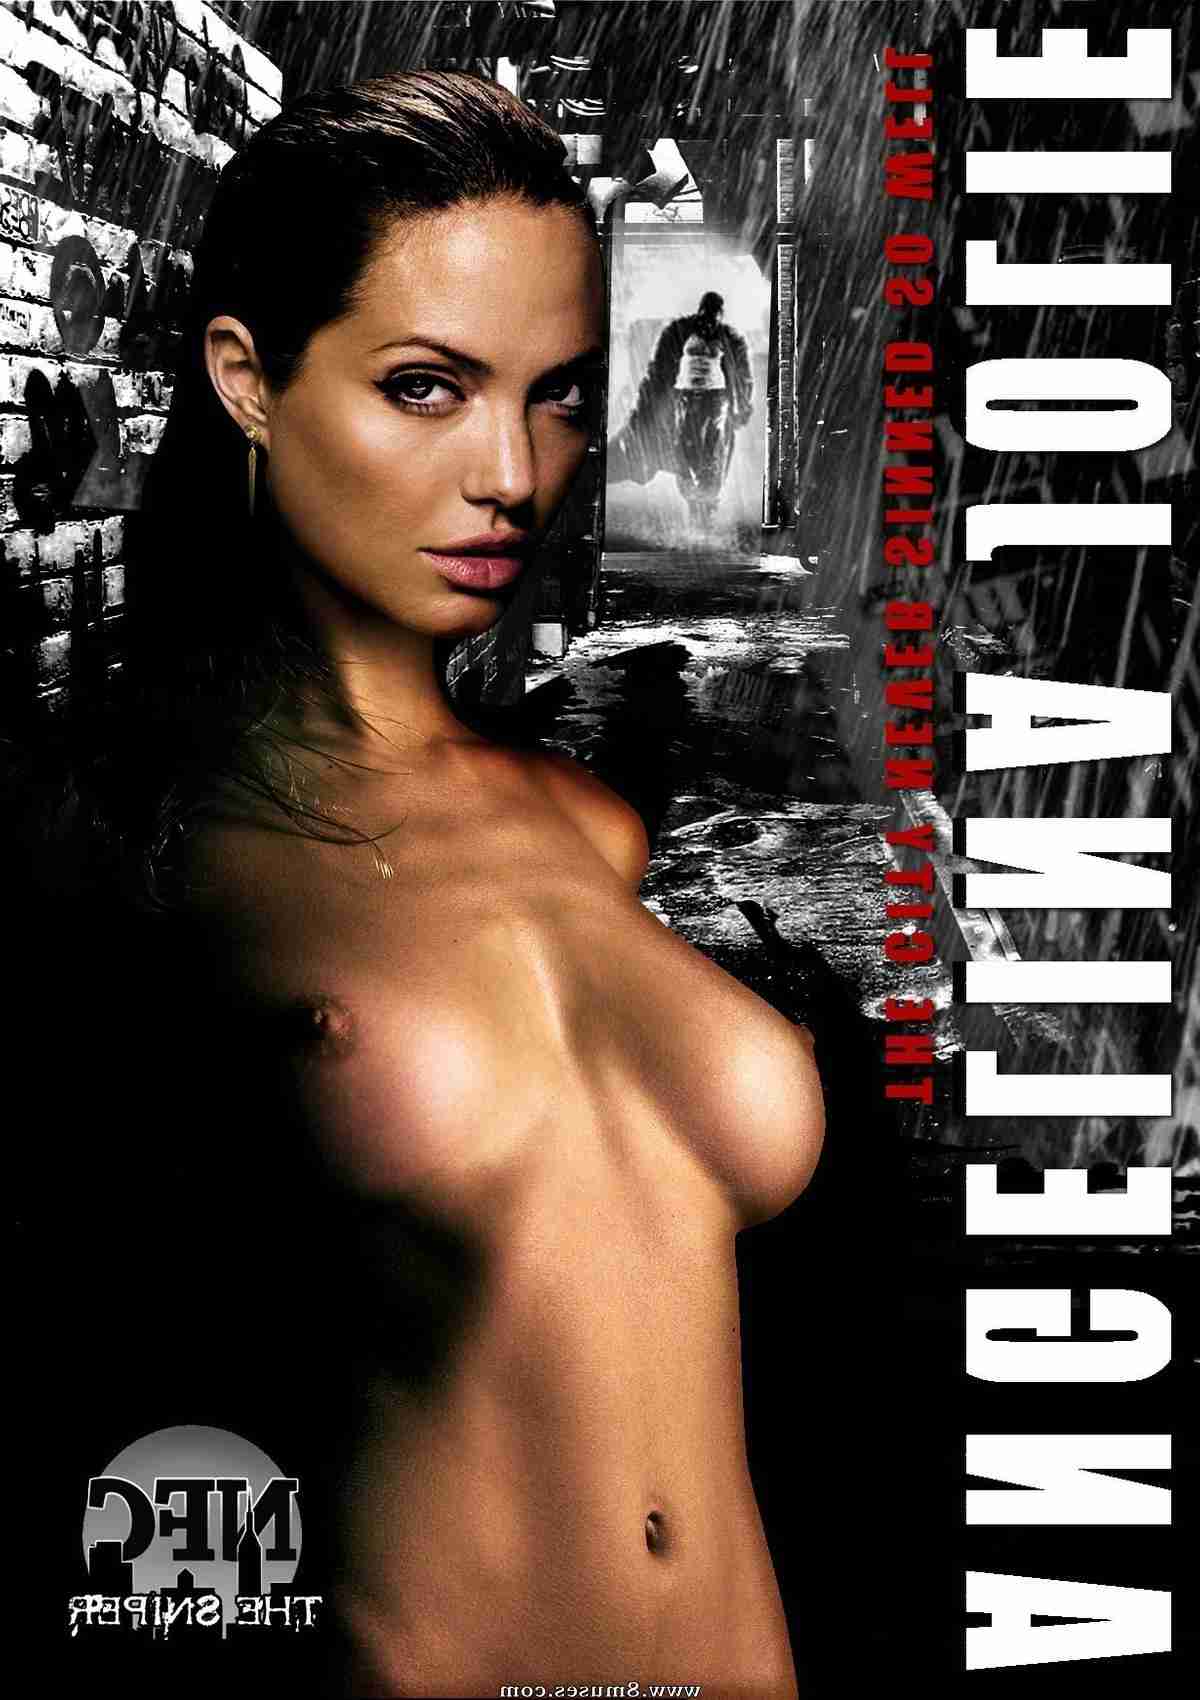 Fake-Celebrities-Sex-Pictures/Angelina-Jolie Angelina_Jolie__8muses_-_Sex_and_Porn_Comics_477.jpg